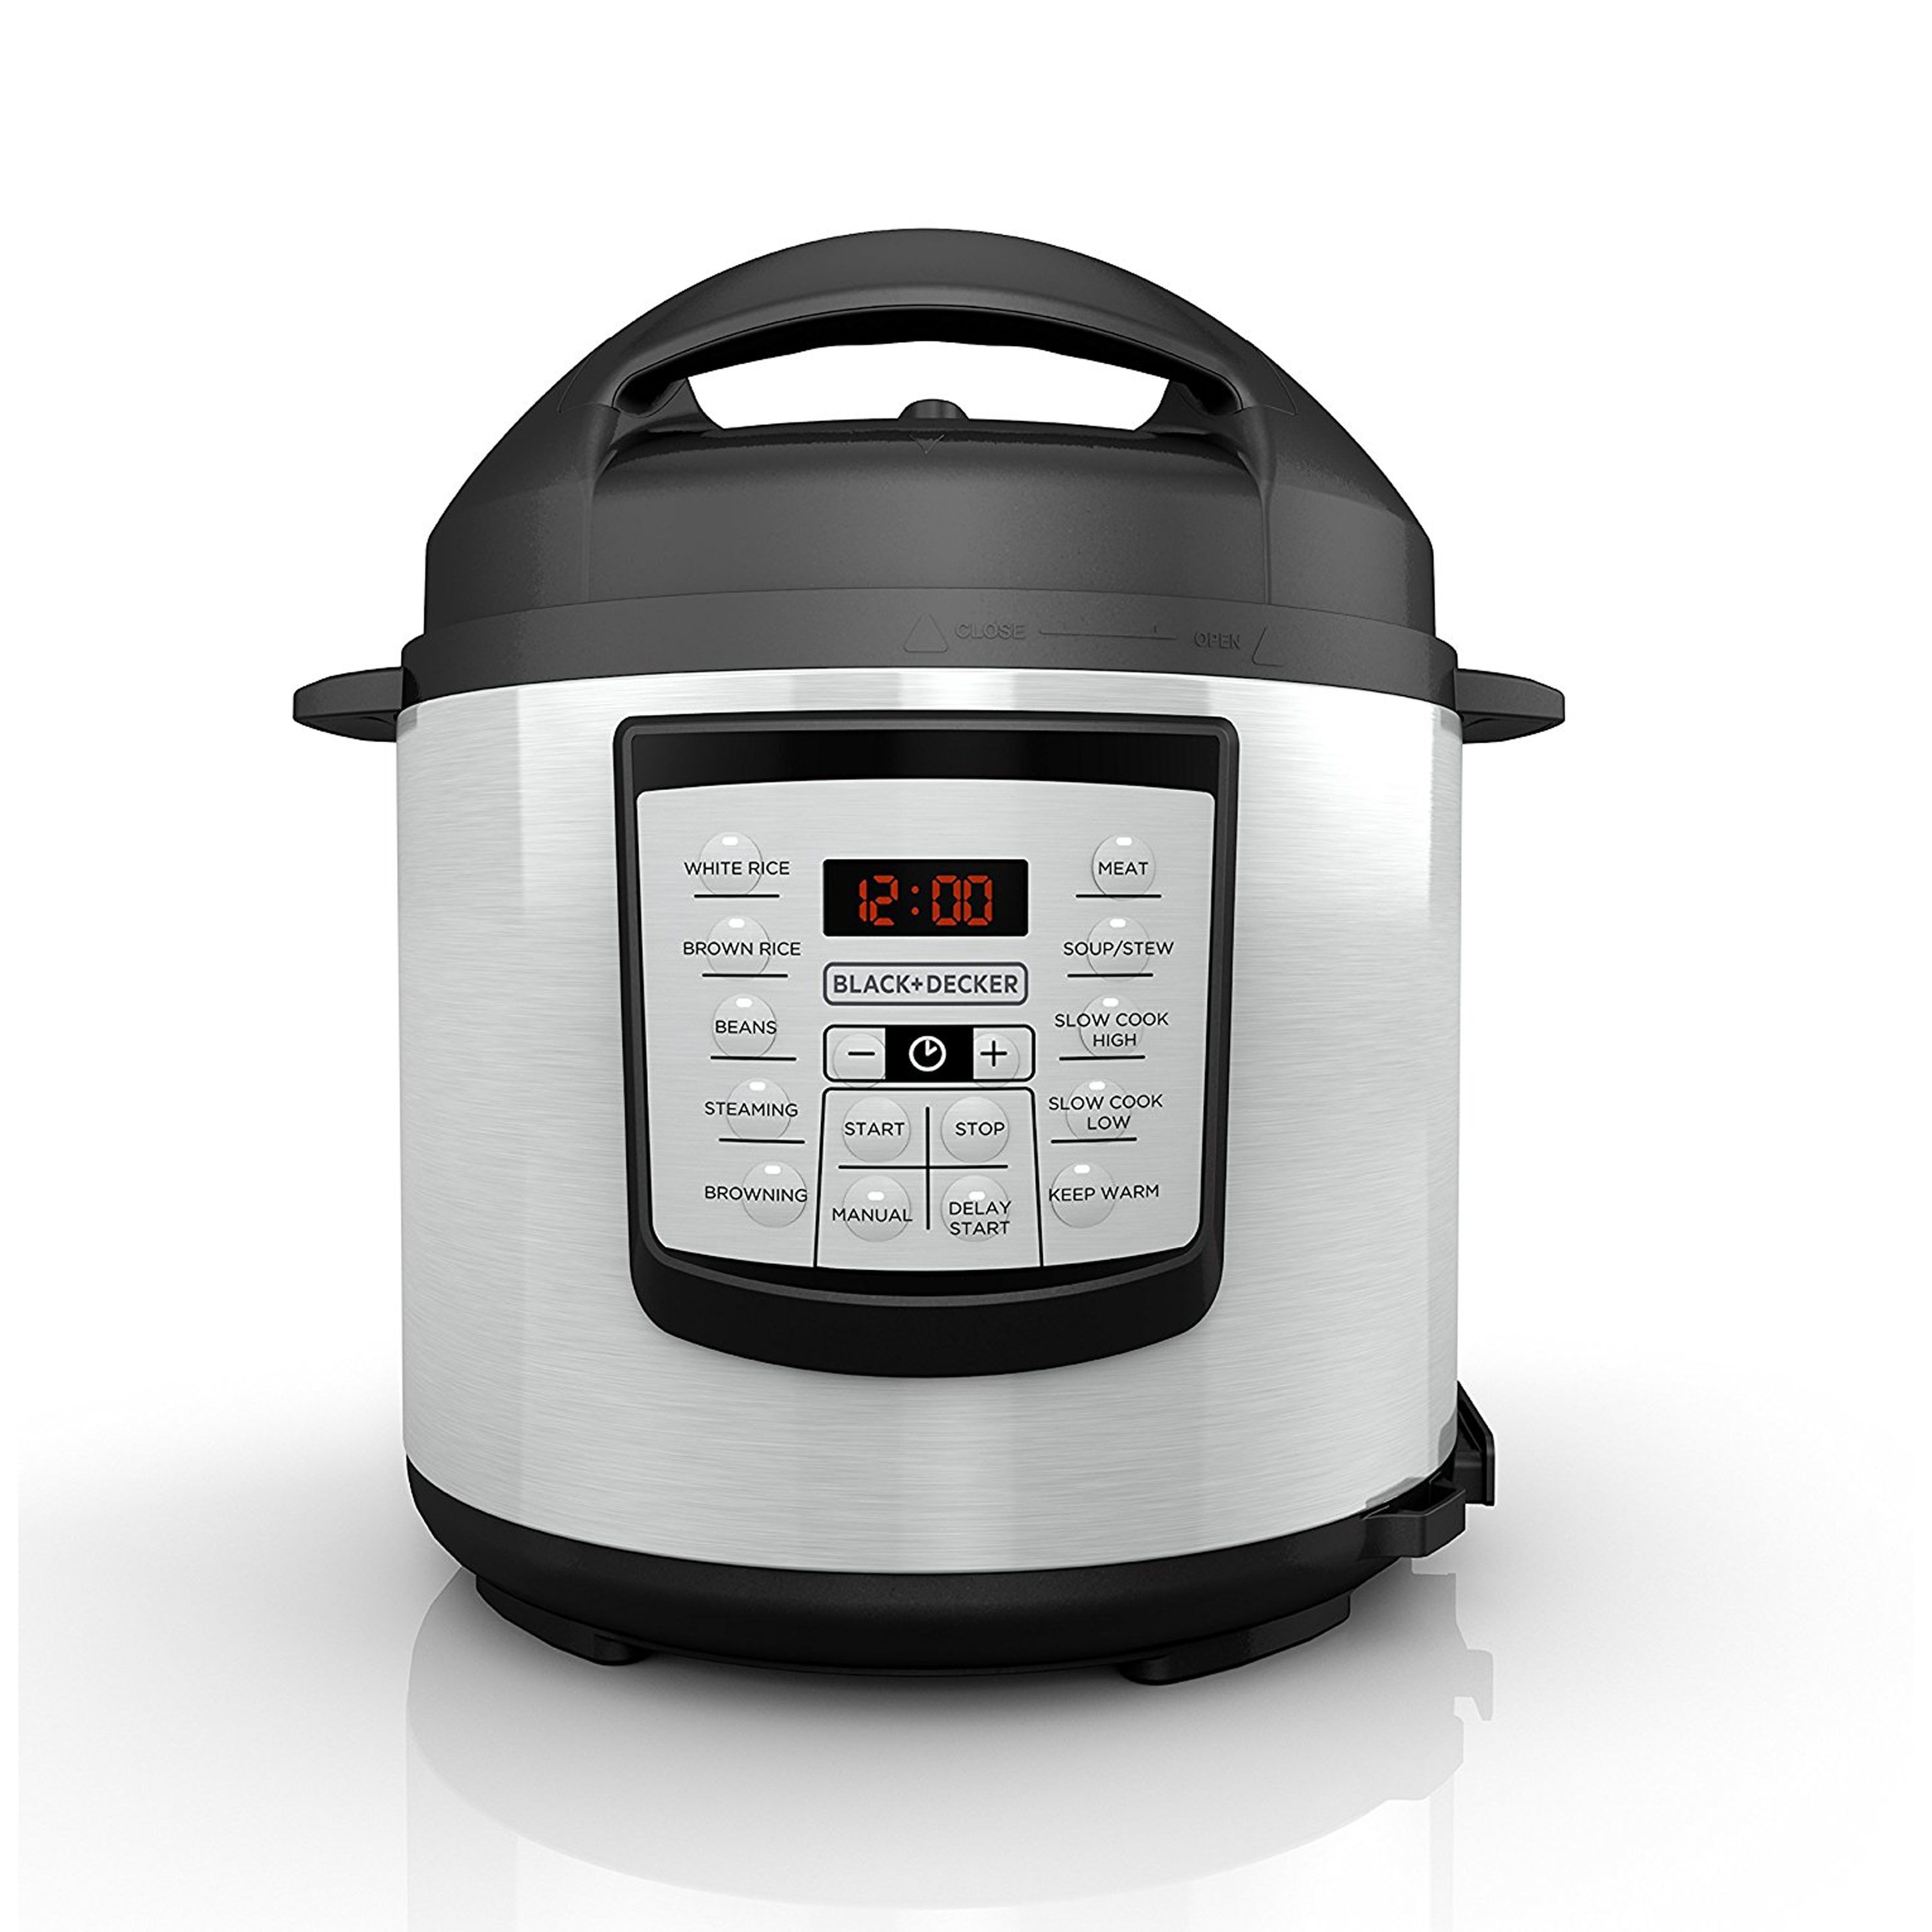 Black + Decker Pressure Cooker Review, Price and Features - Pros